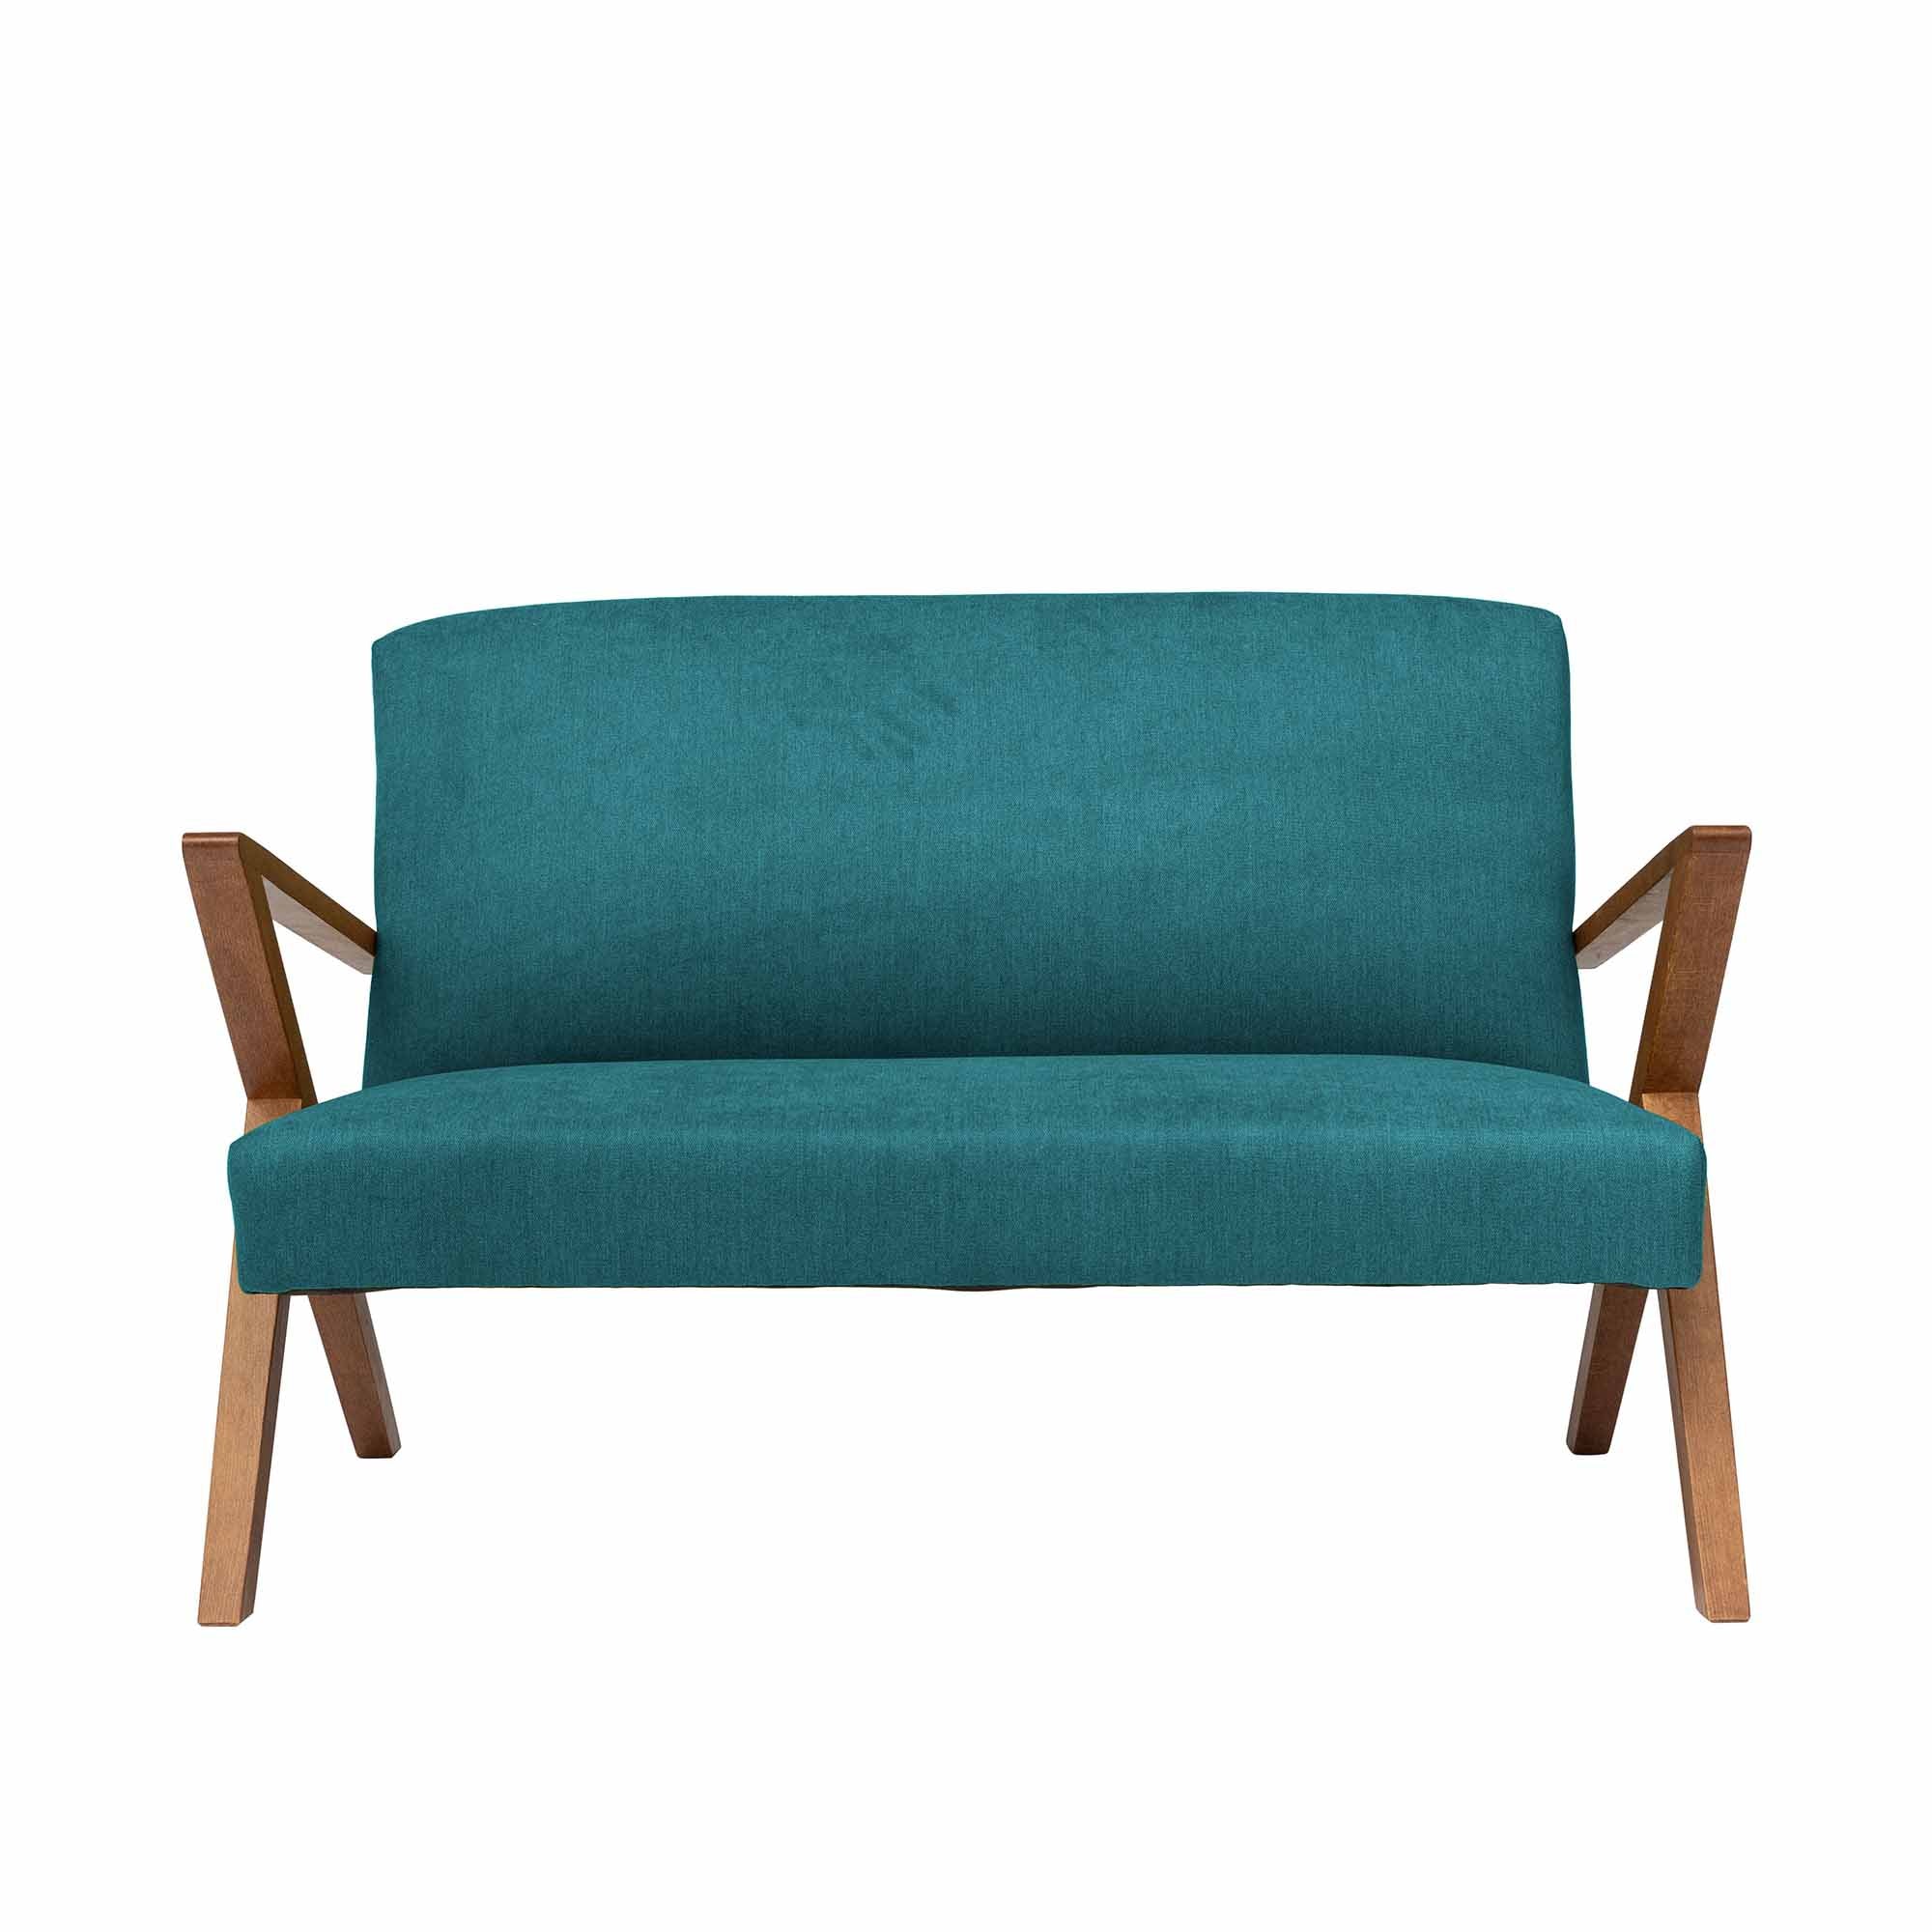  2-Seater Sofa, Beech Wood Frame, Walnut Colour blue fabric, front view